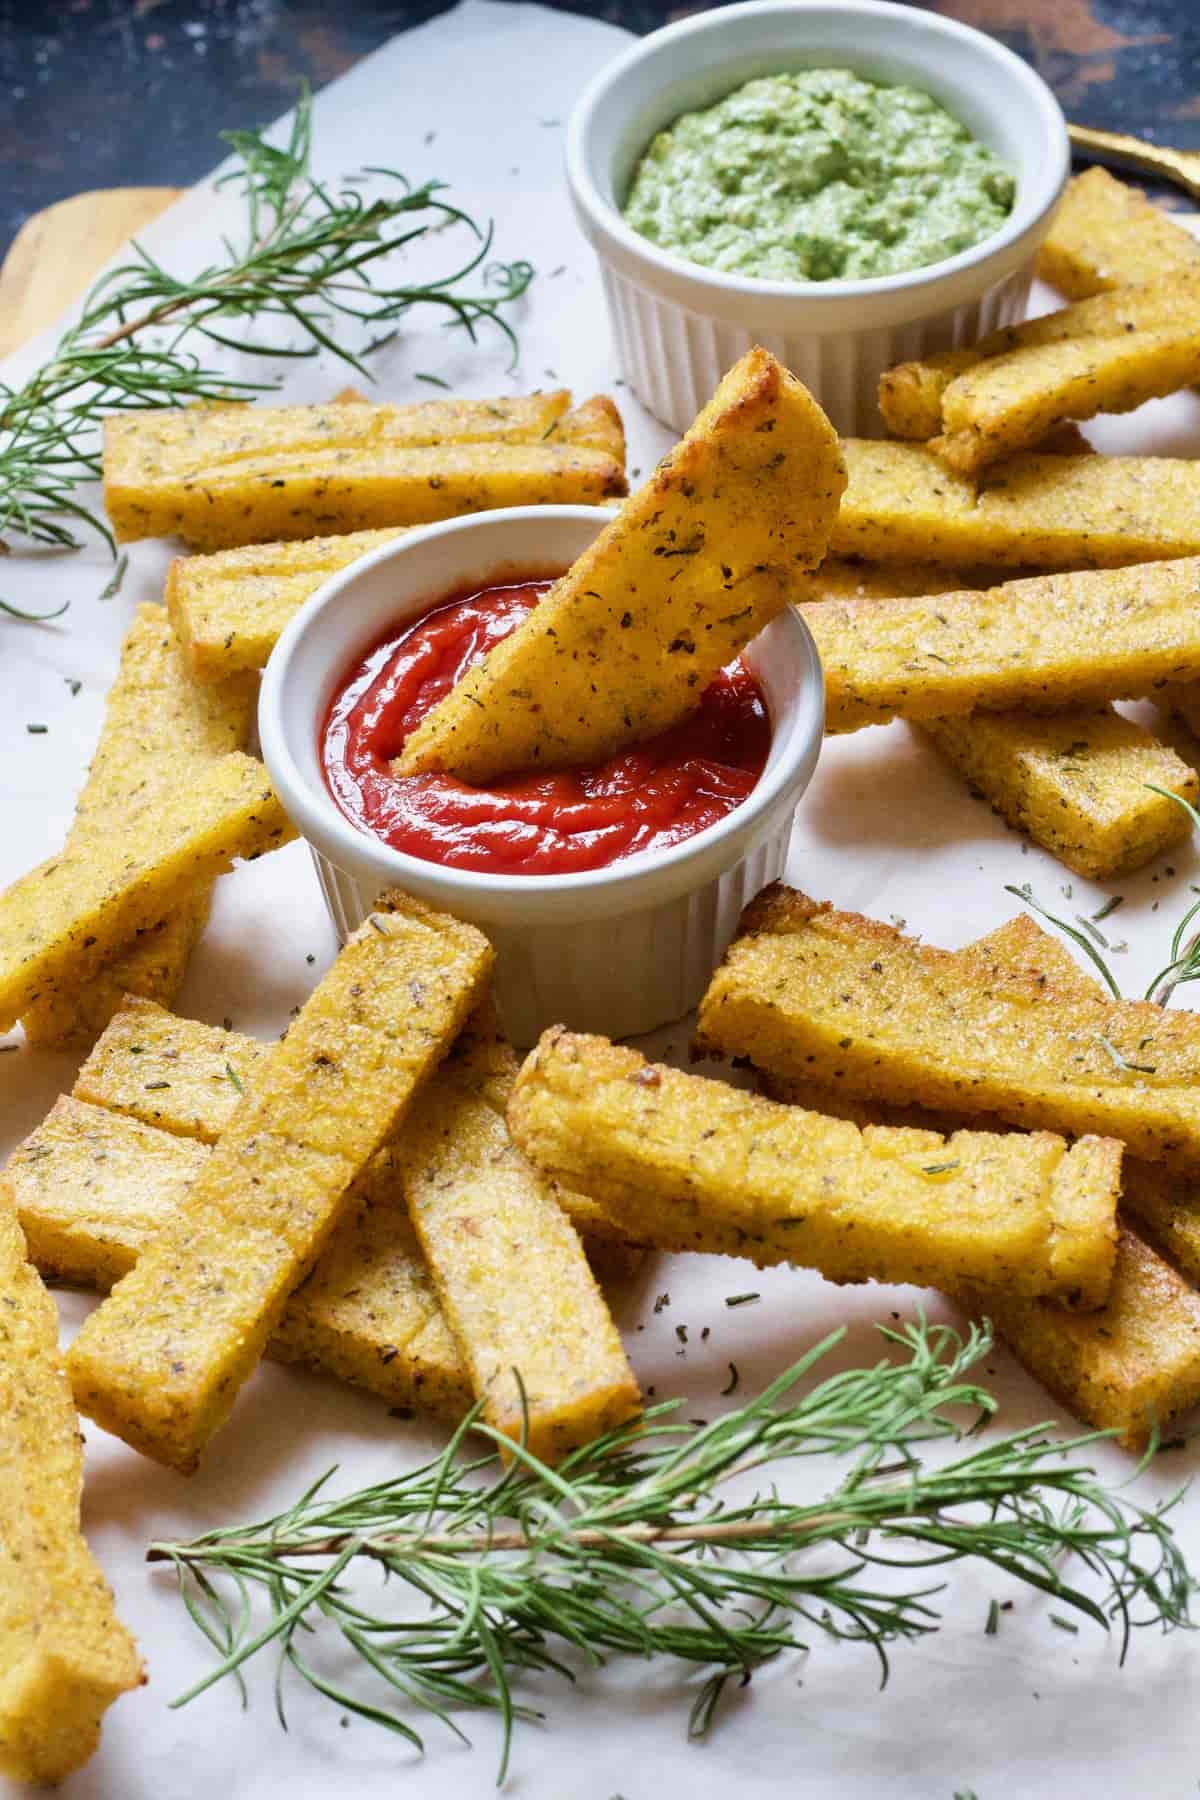 Polenta chip in a bowl of ketchup with more chips around.